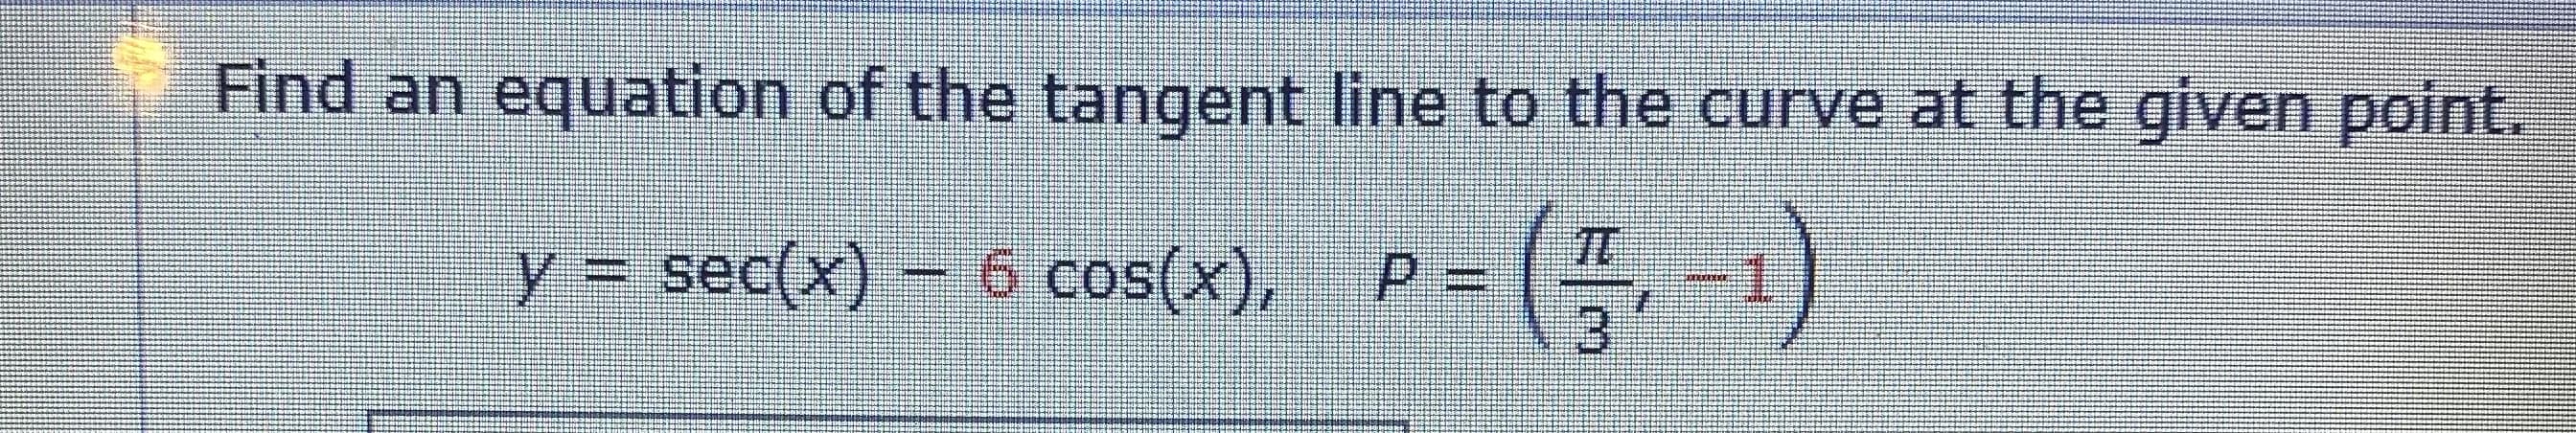 Find an equation of the tangent line to the curve at the given point.
(;-)
TT
y = sec(x) – 6 cos(x),
P.
